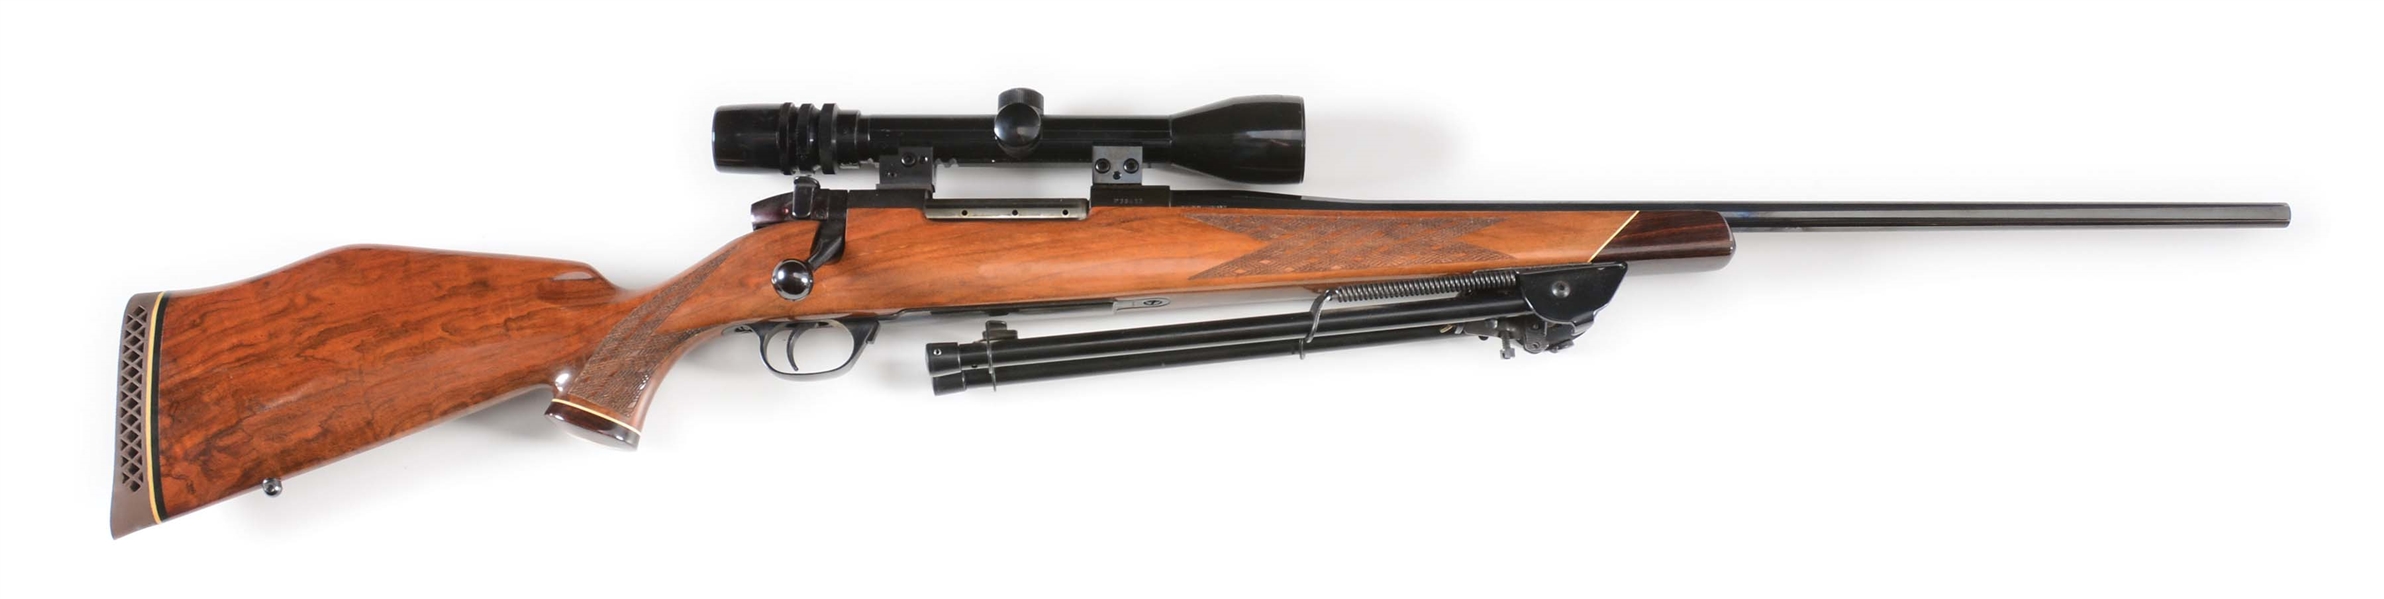 (M) WEATHERBY MARK V BOLT ACTION RIFLE WITH SCOPE.